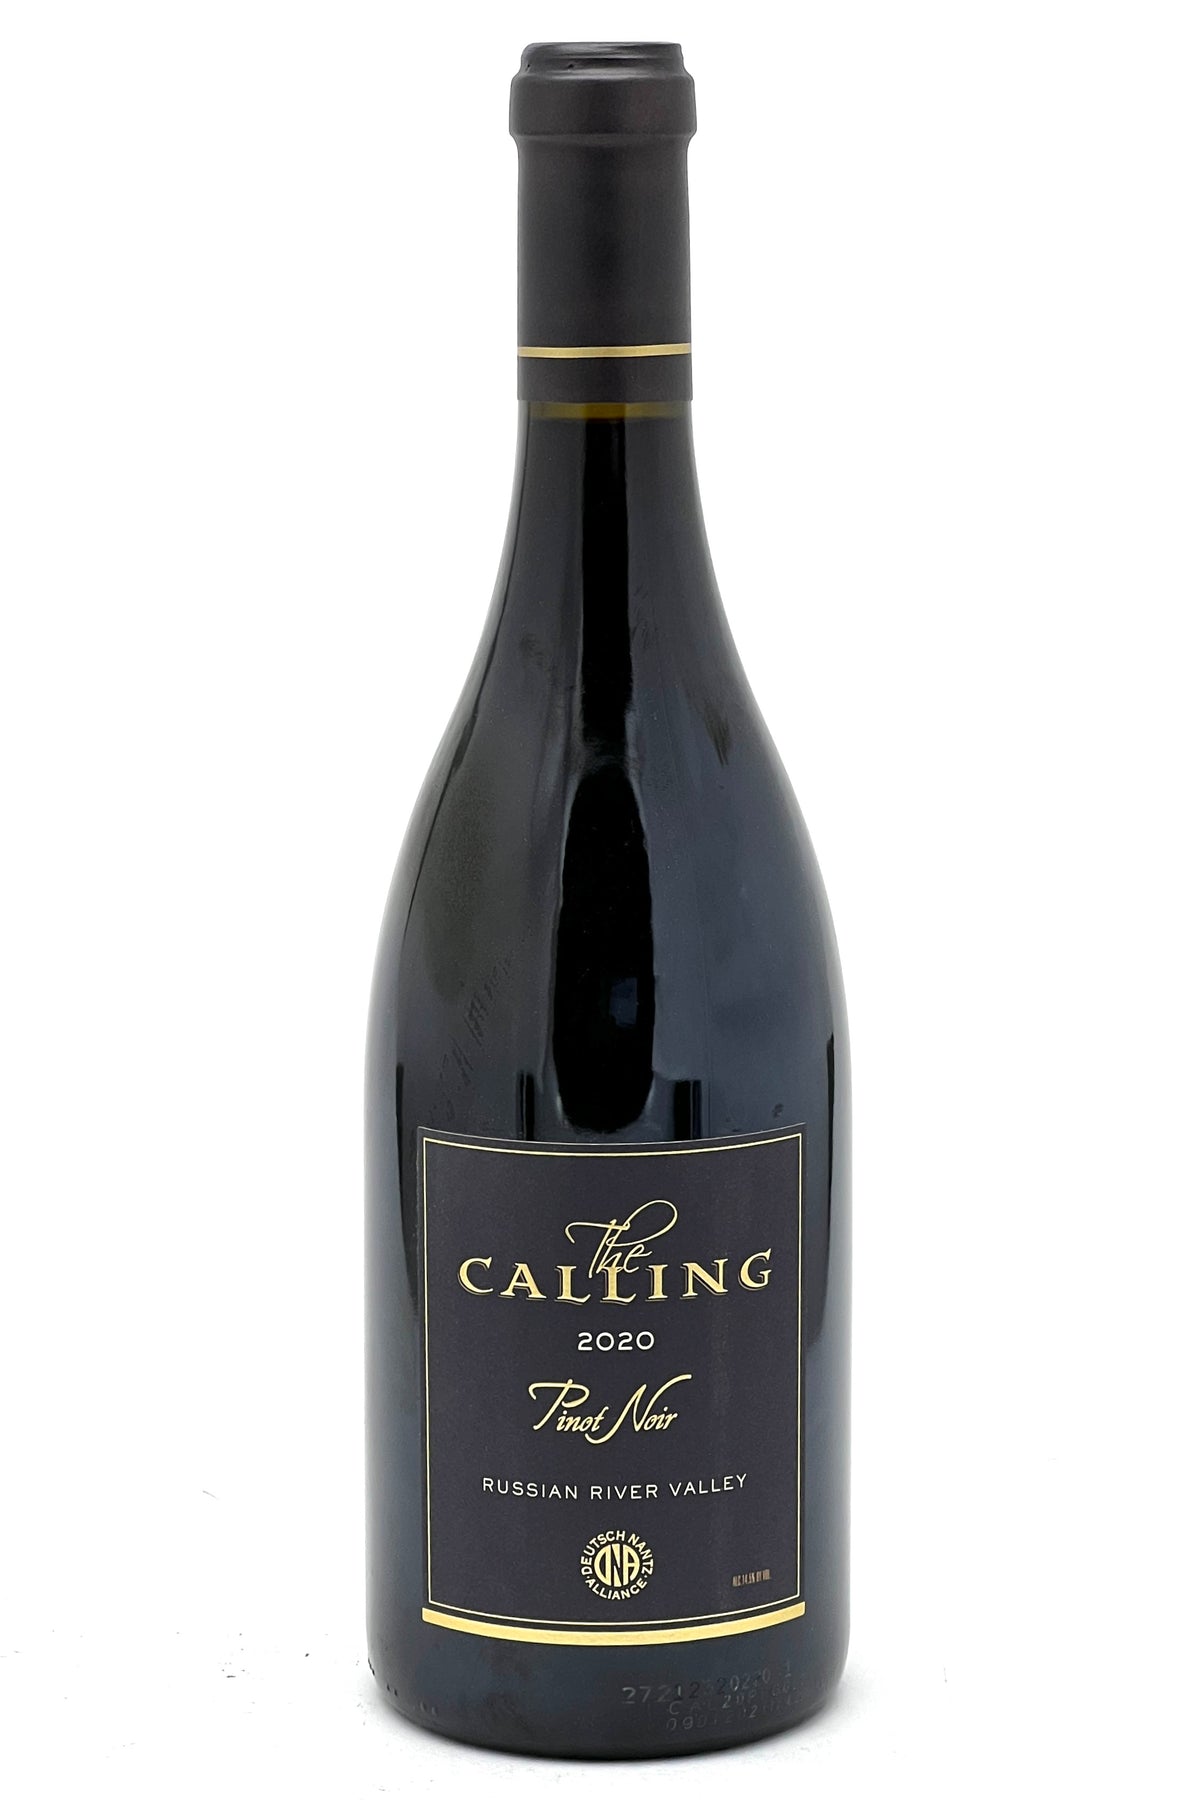 The Calling 2020 Pinot Noir Russian River Valley